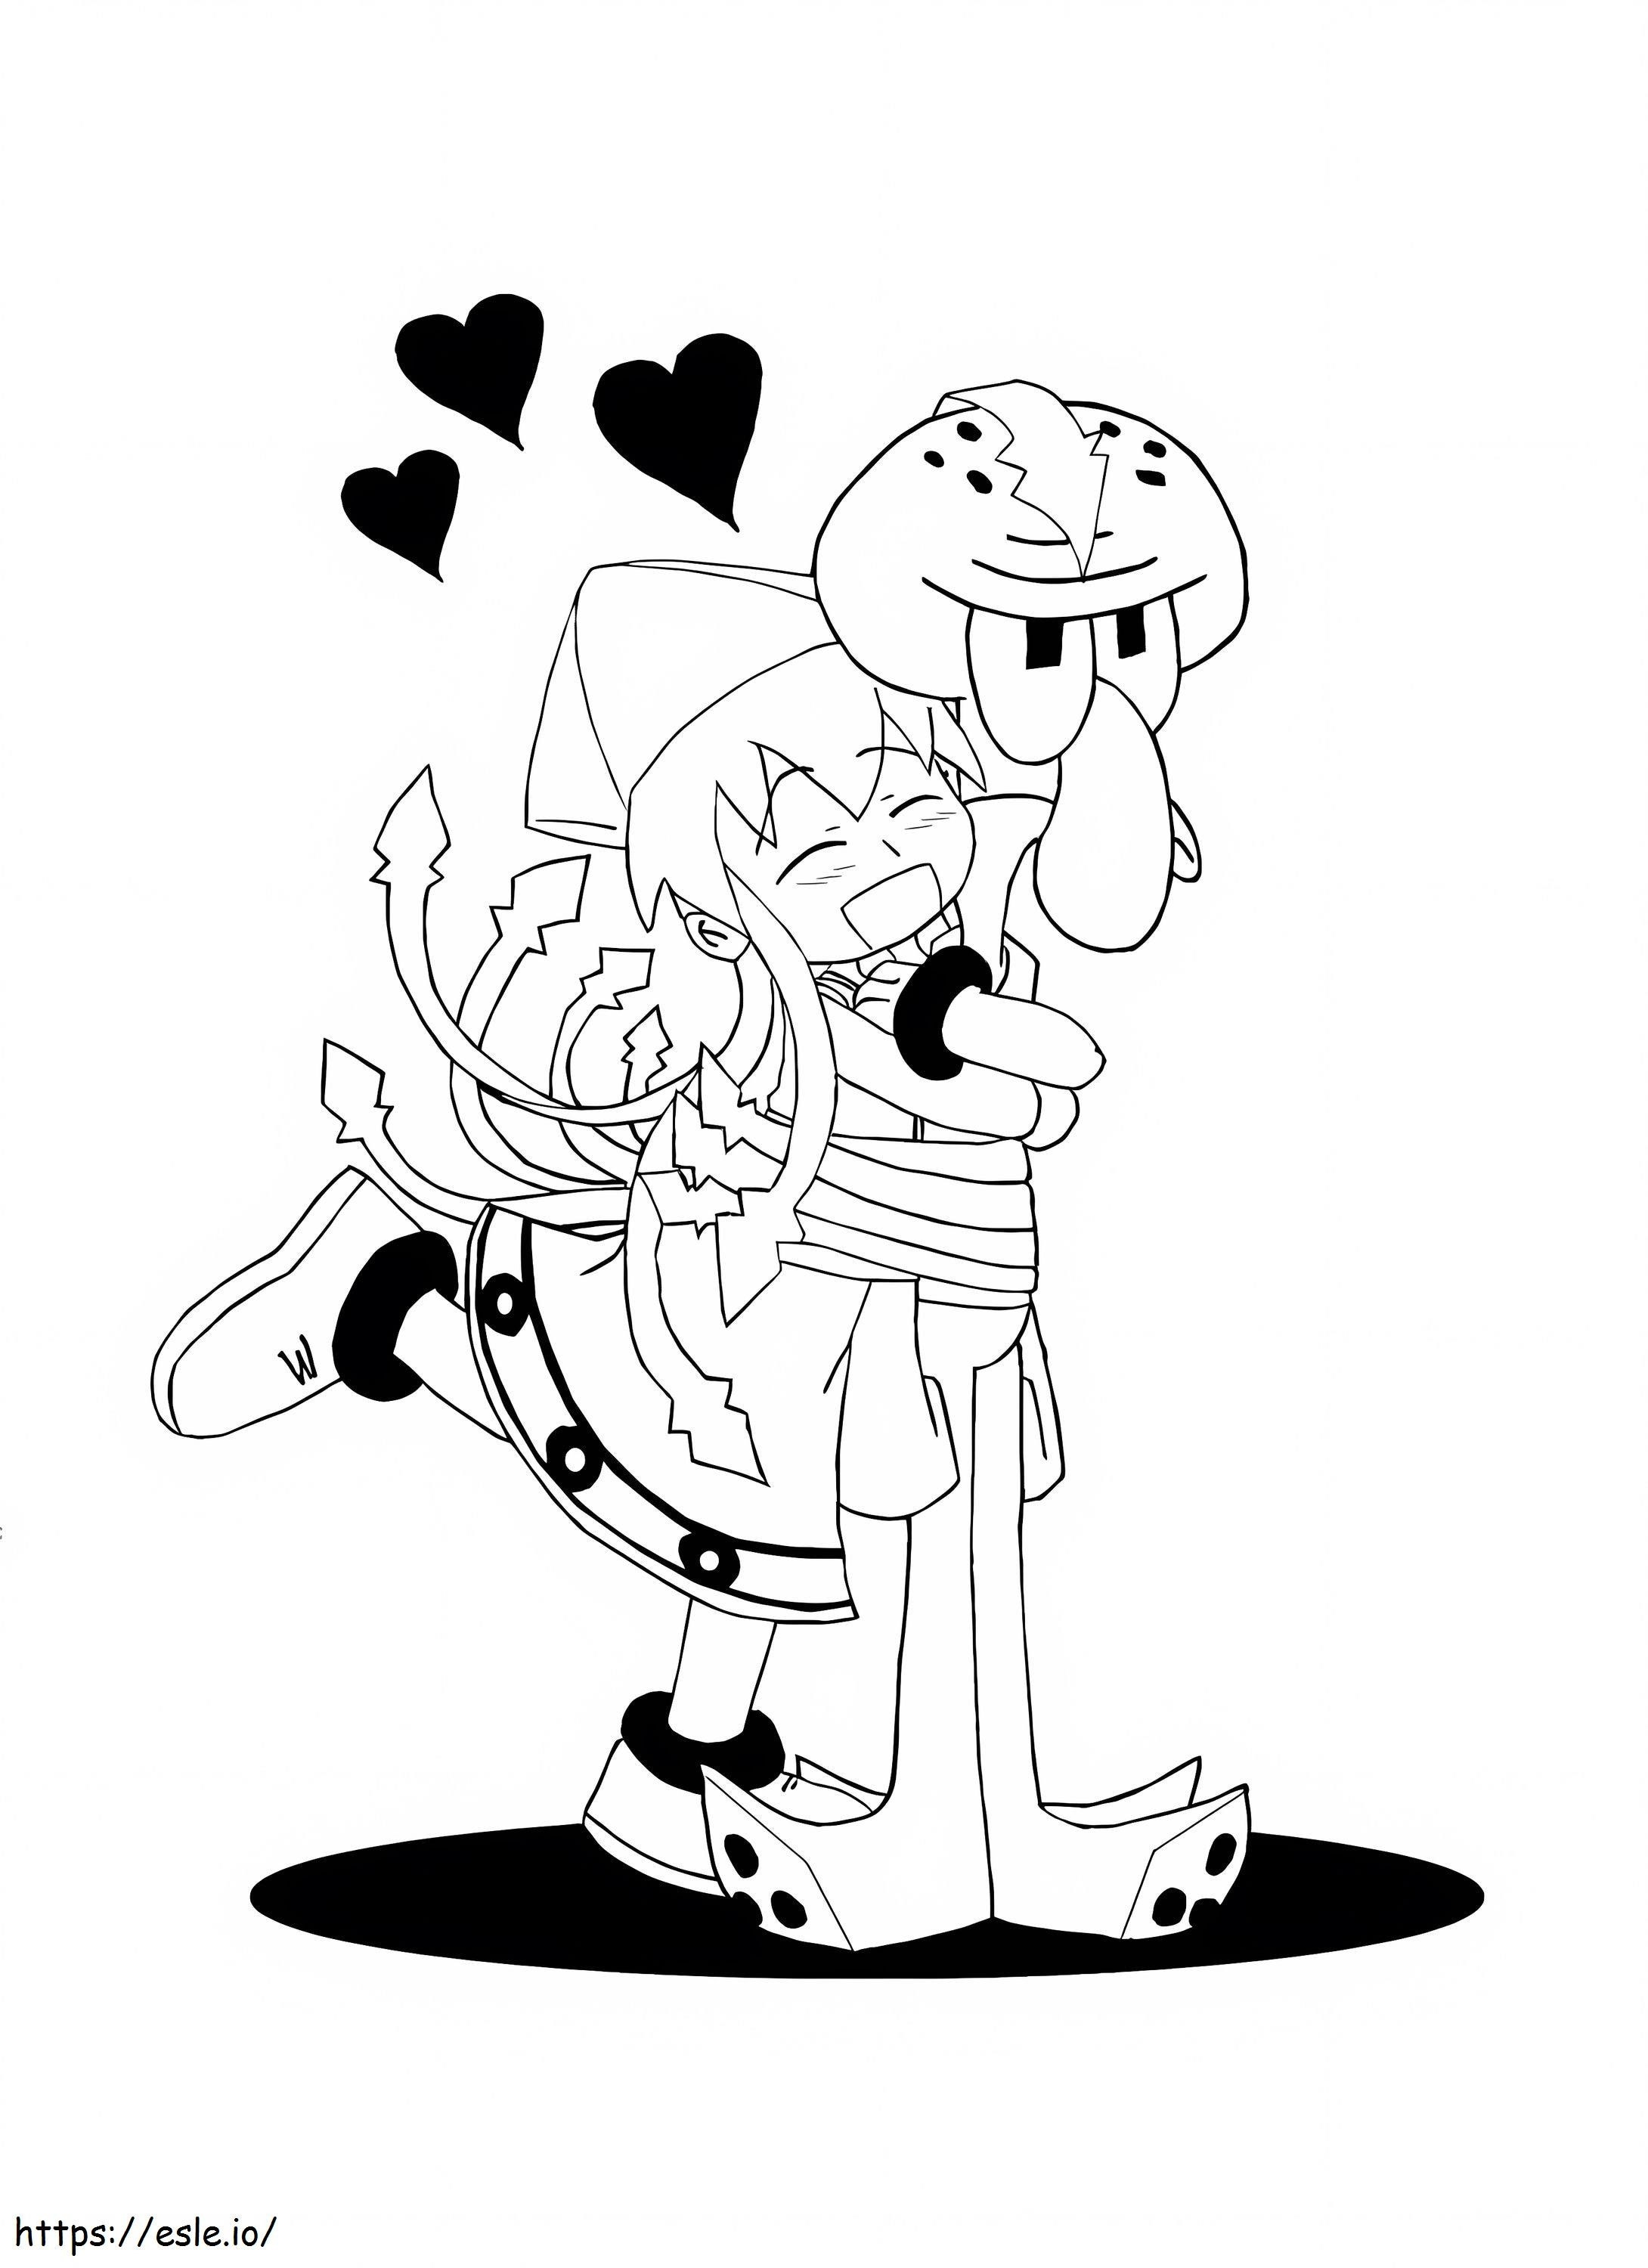 Love Squidward Tentacles coloring page